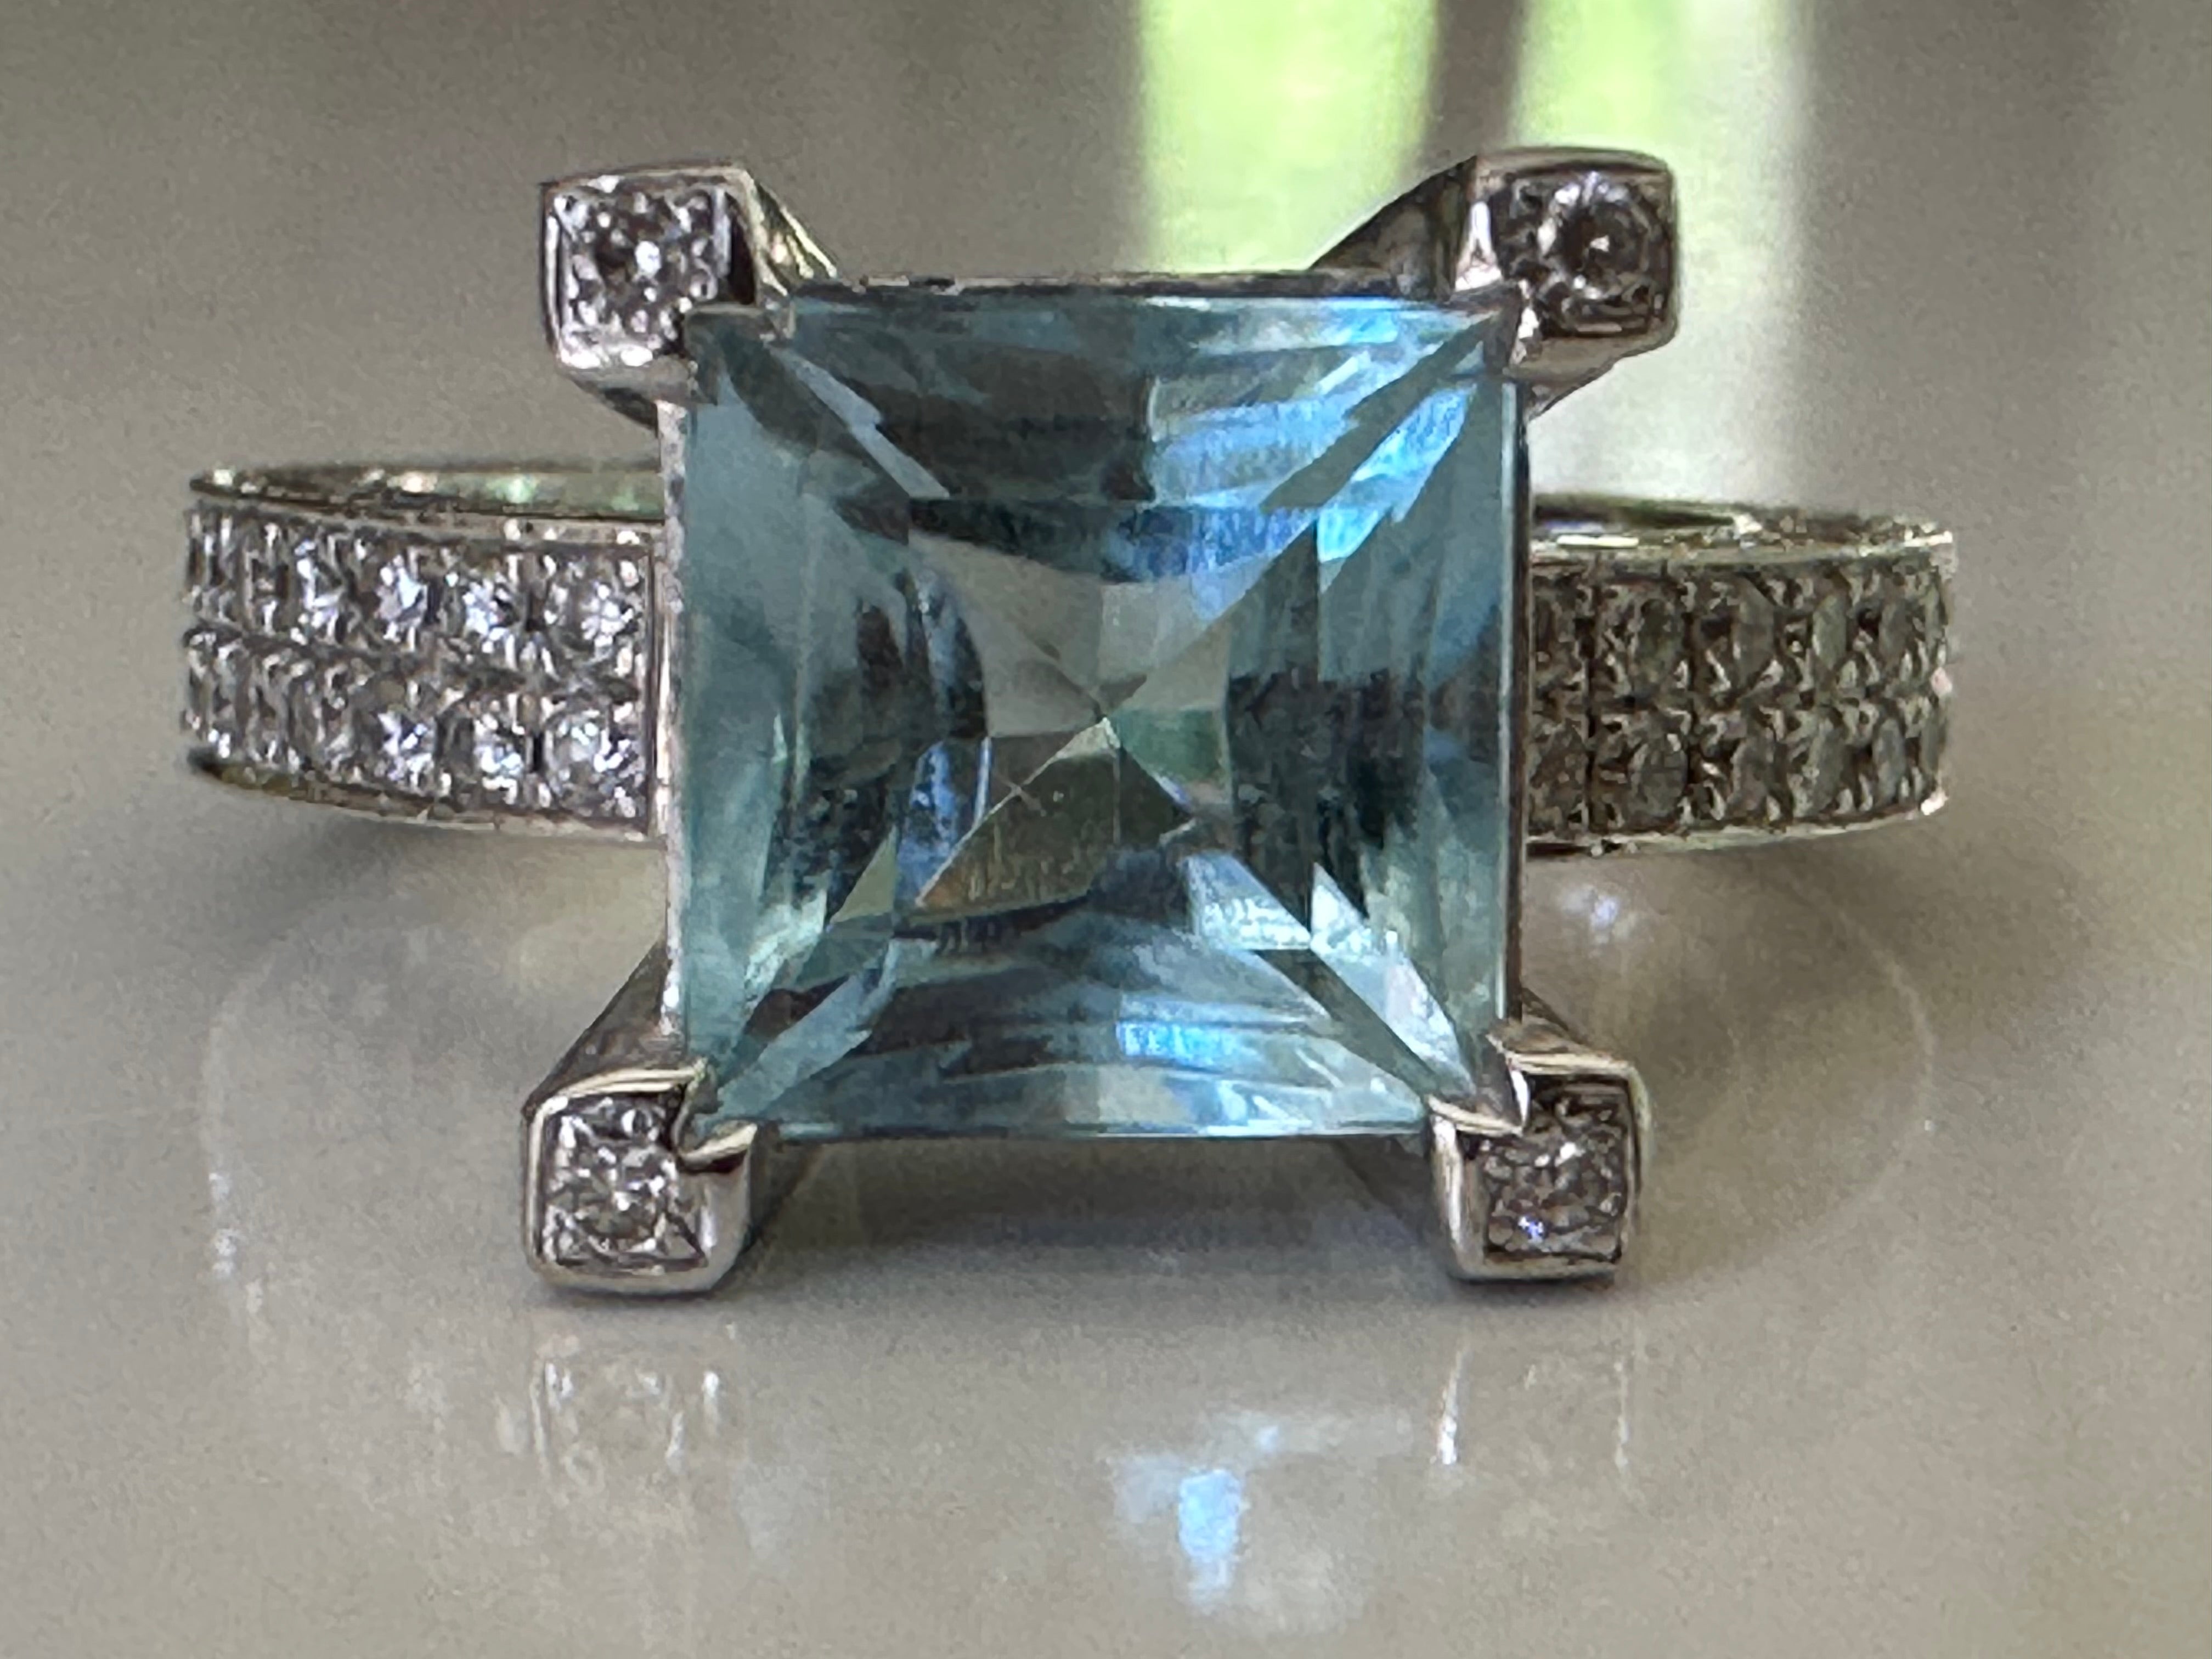 This gorgeous Estate cocktail ring is designed around a large, square cut clear blue topaz center stone measuring 8.35x8.4mm. The 18k white gold band is inlaid (on both the top and the sides of the band) with 186 shimmering round brilliant-cut